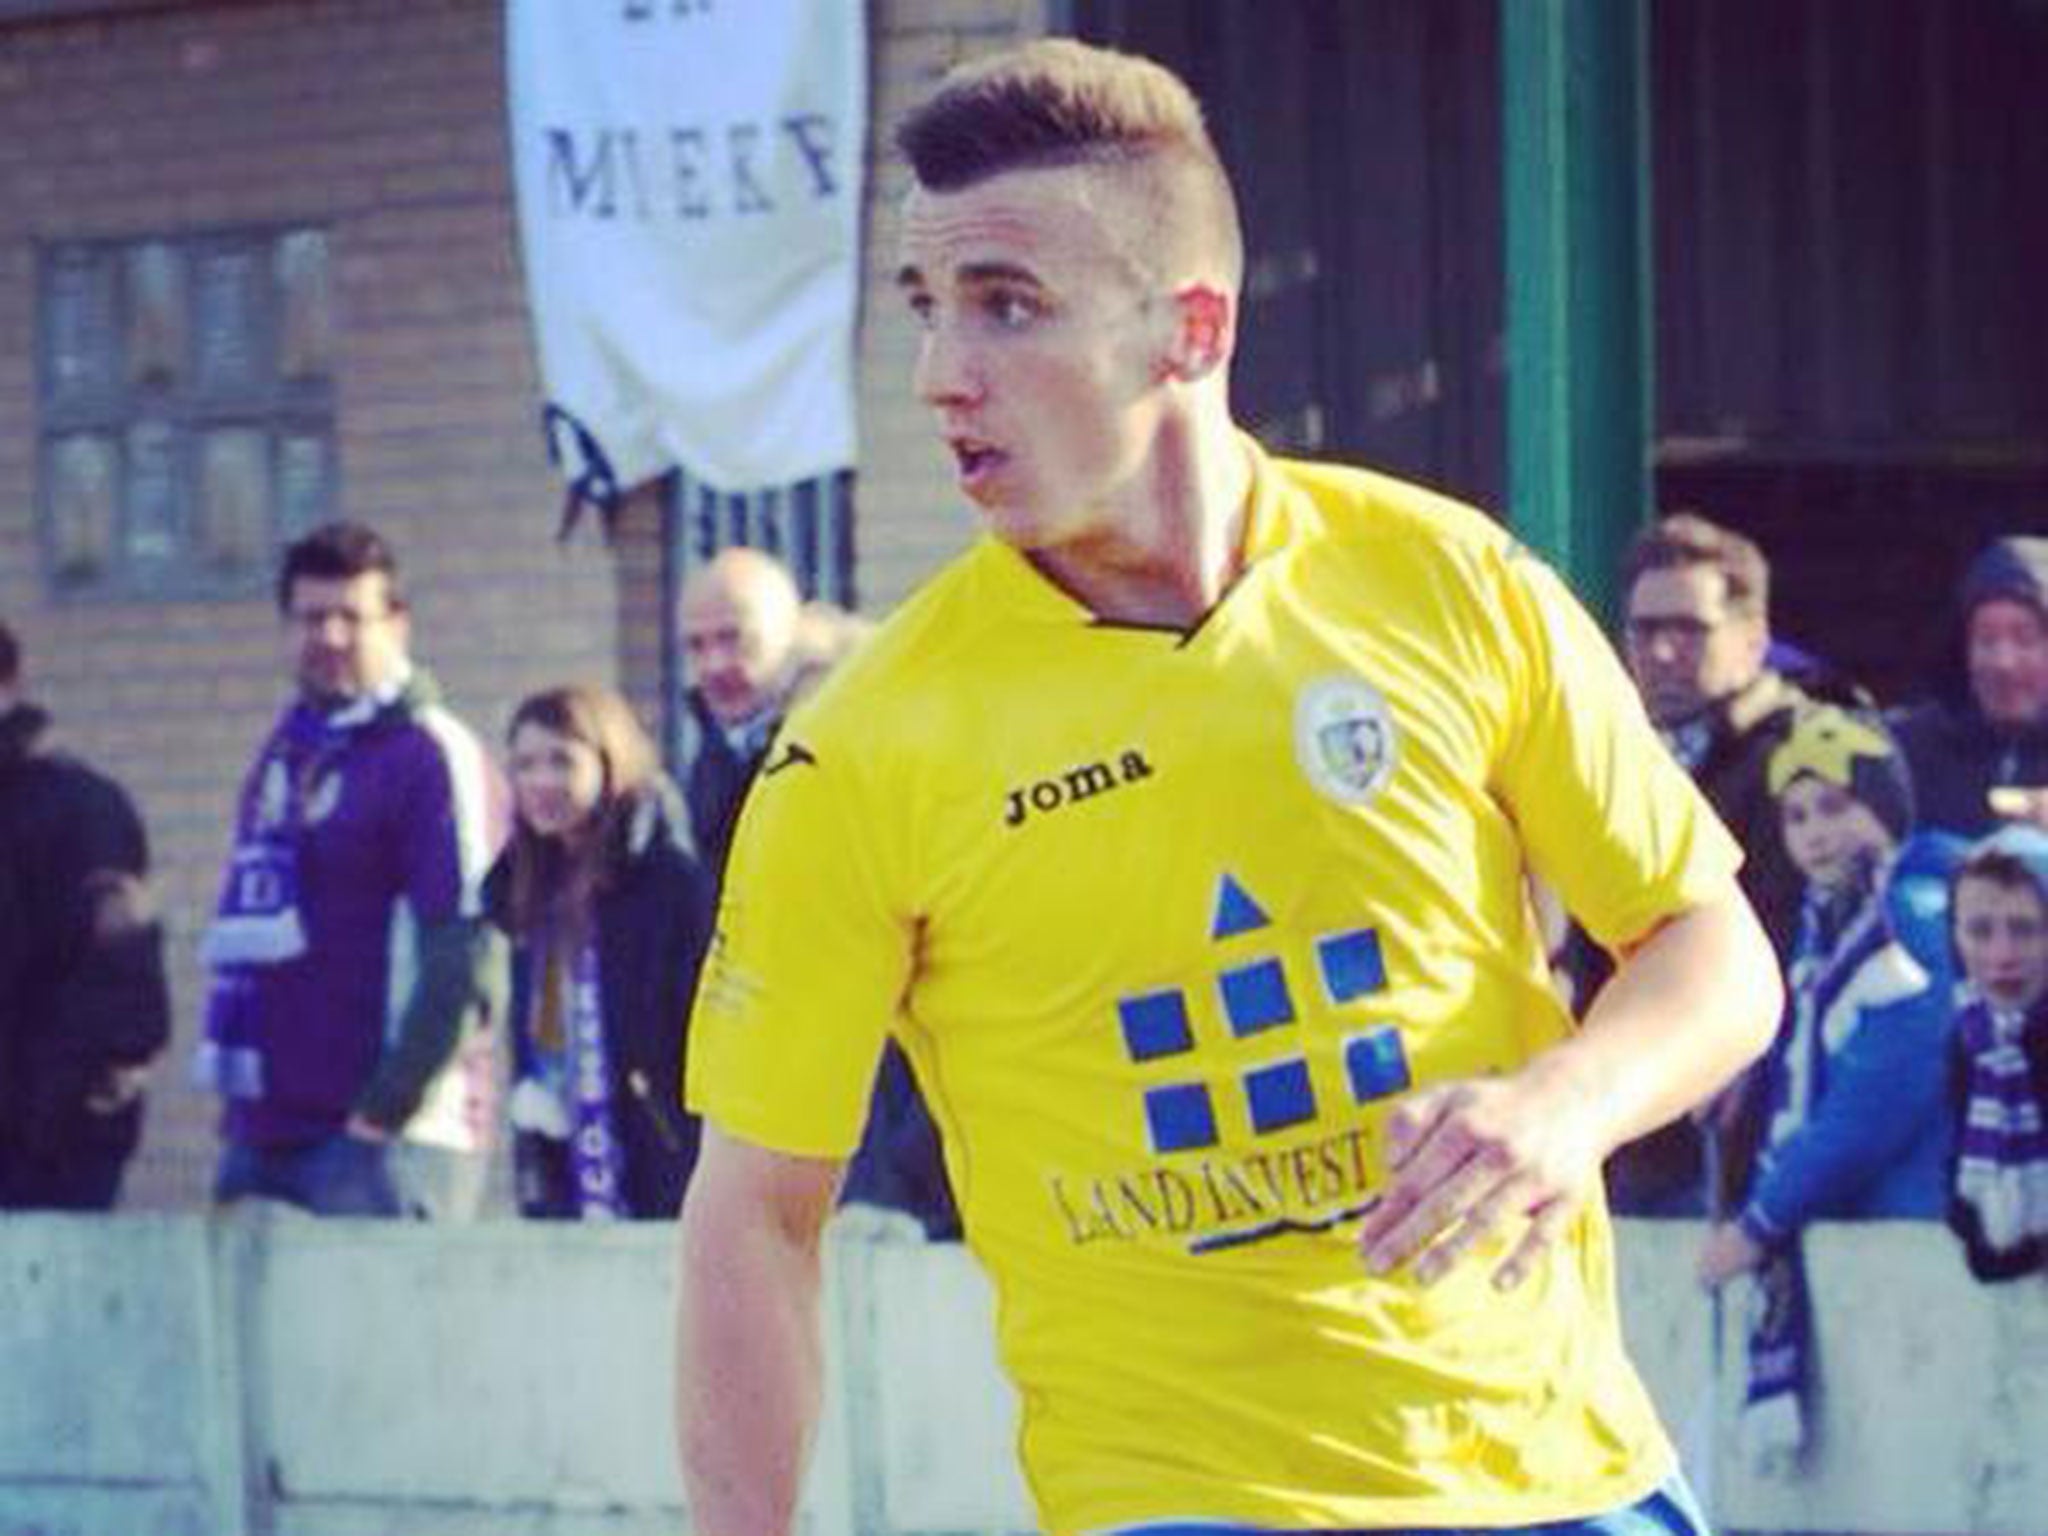 Tim Nicot, a Belgian footballer, suffered a cardiac arrest while playing for KFCO Wilrijk Beerschot on Friday 8 May, and died in hospital on Monday 11 May, aged 24.